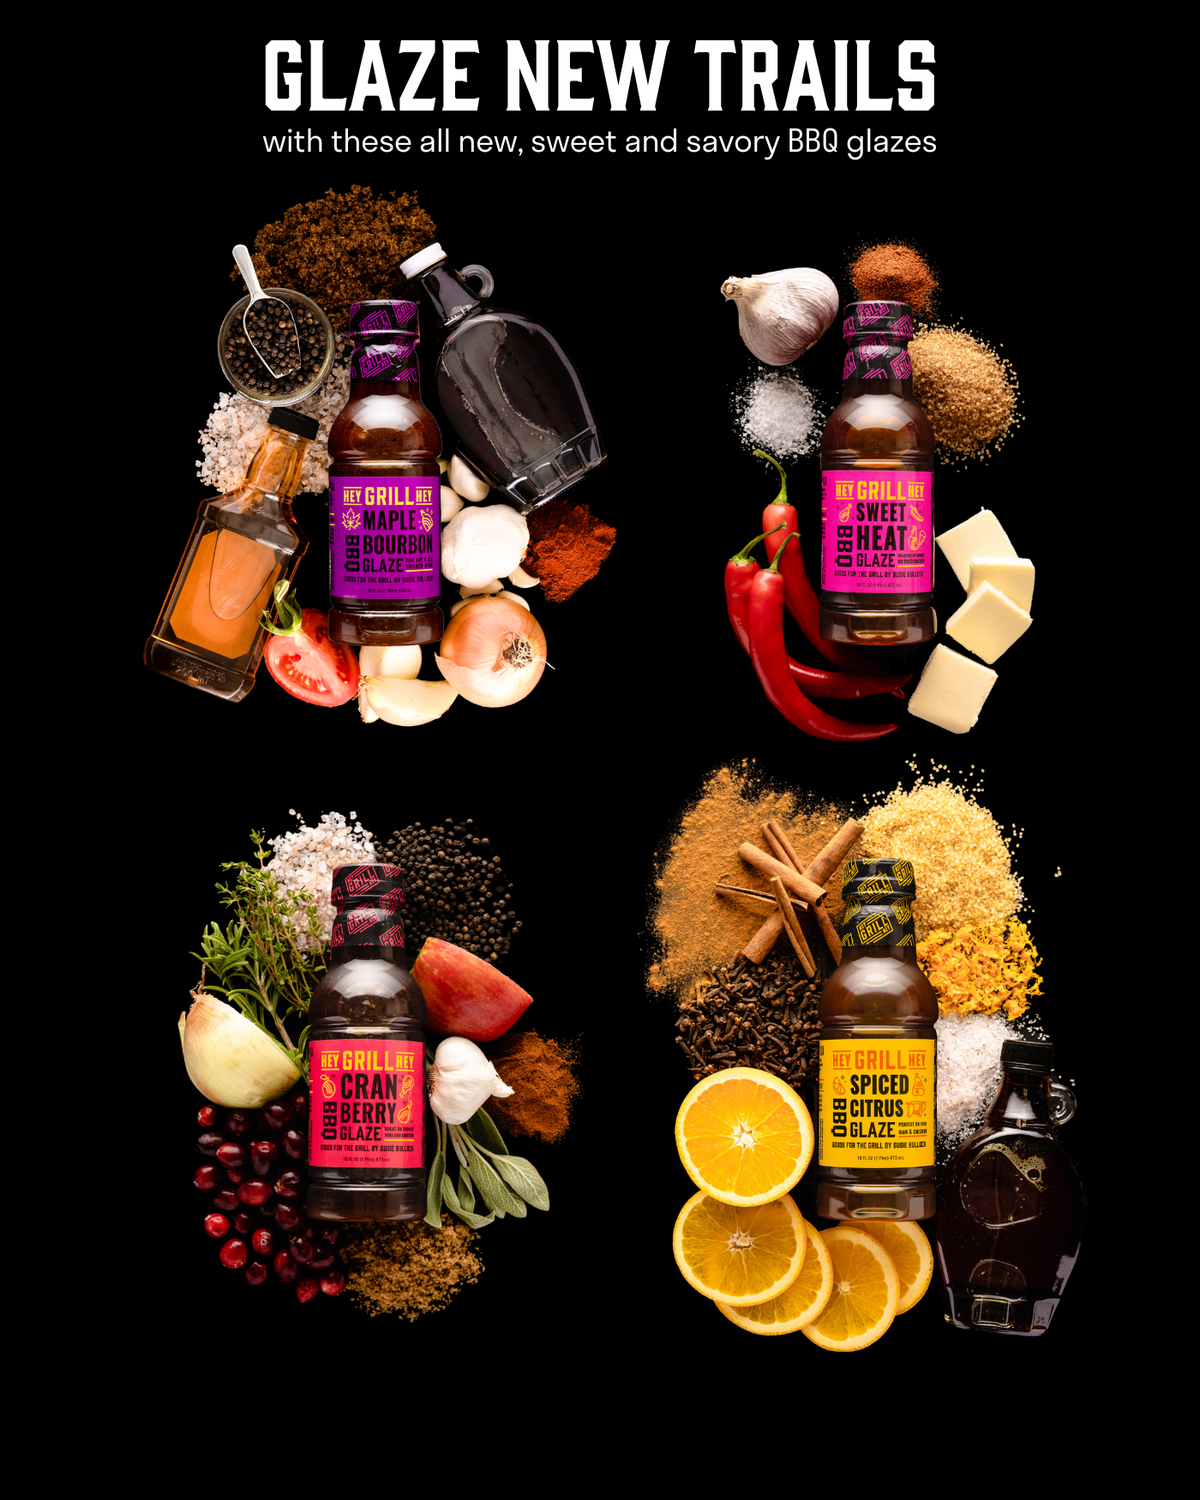 Image of 4 glaze bottles surrounded by complementary ingredients with header text that reads "Glaze New Trails with these all new, sweet and savory BBQ glazes"